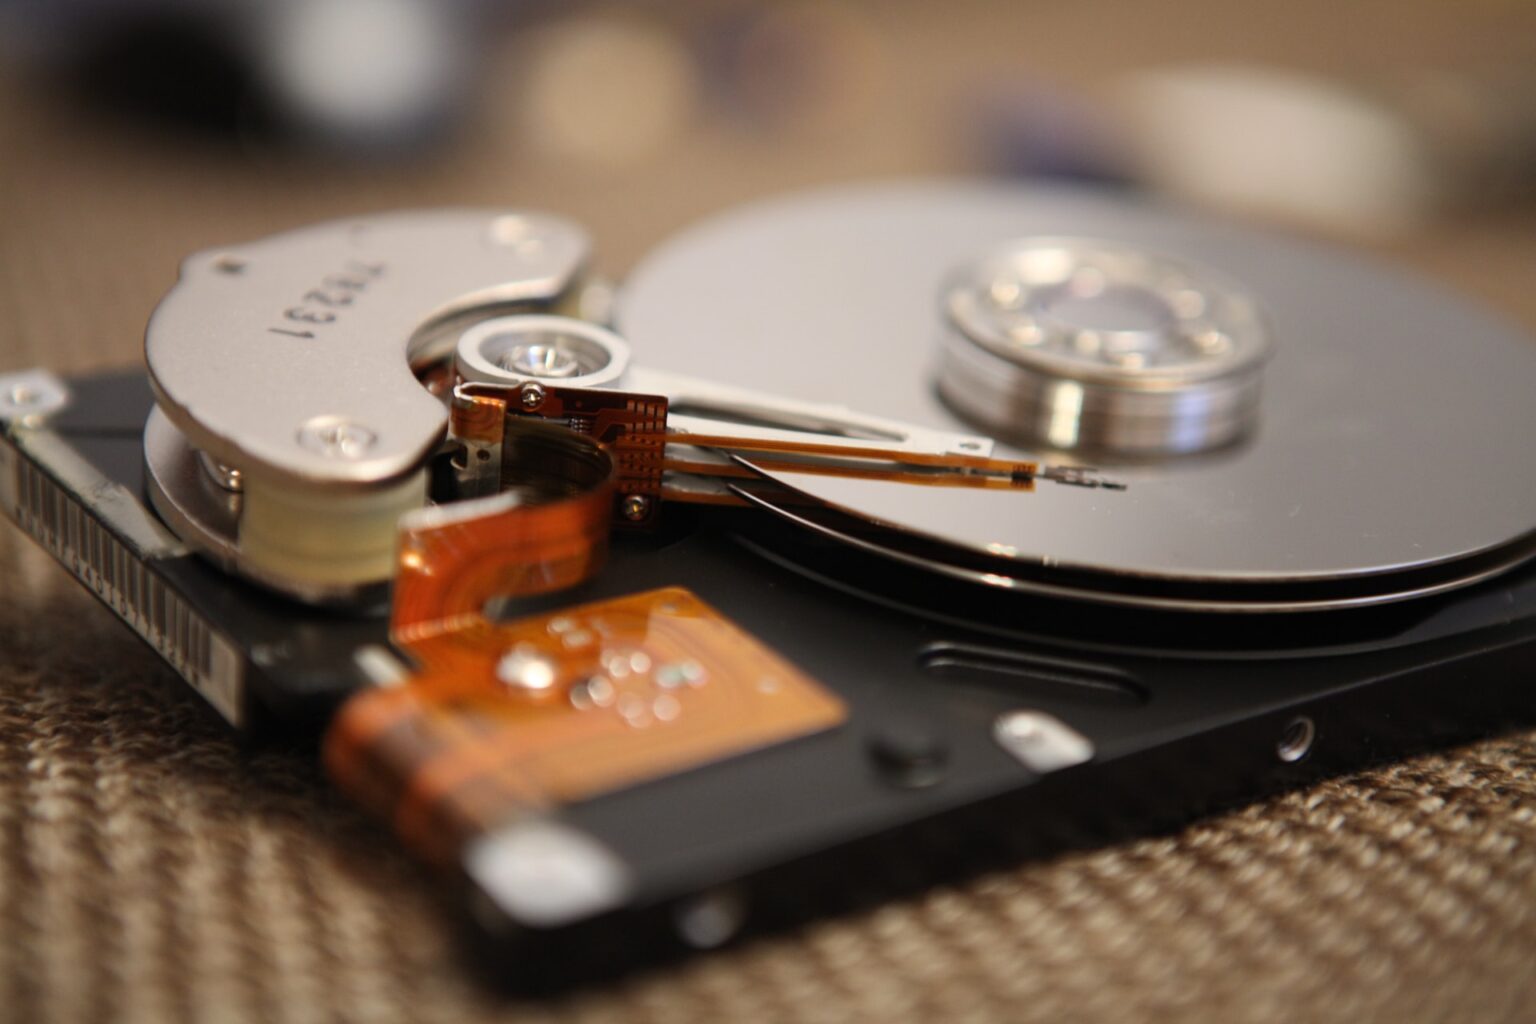 the best hard drive recovery software ever